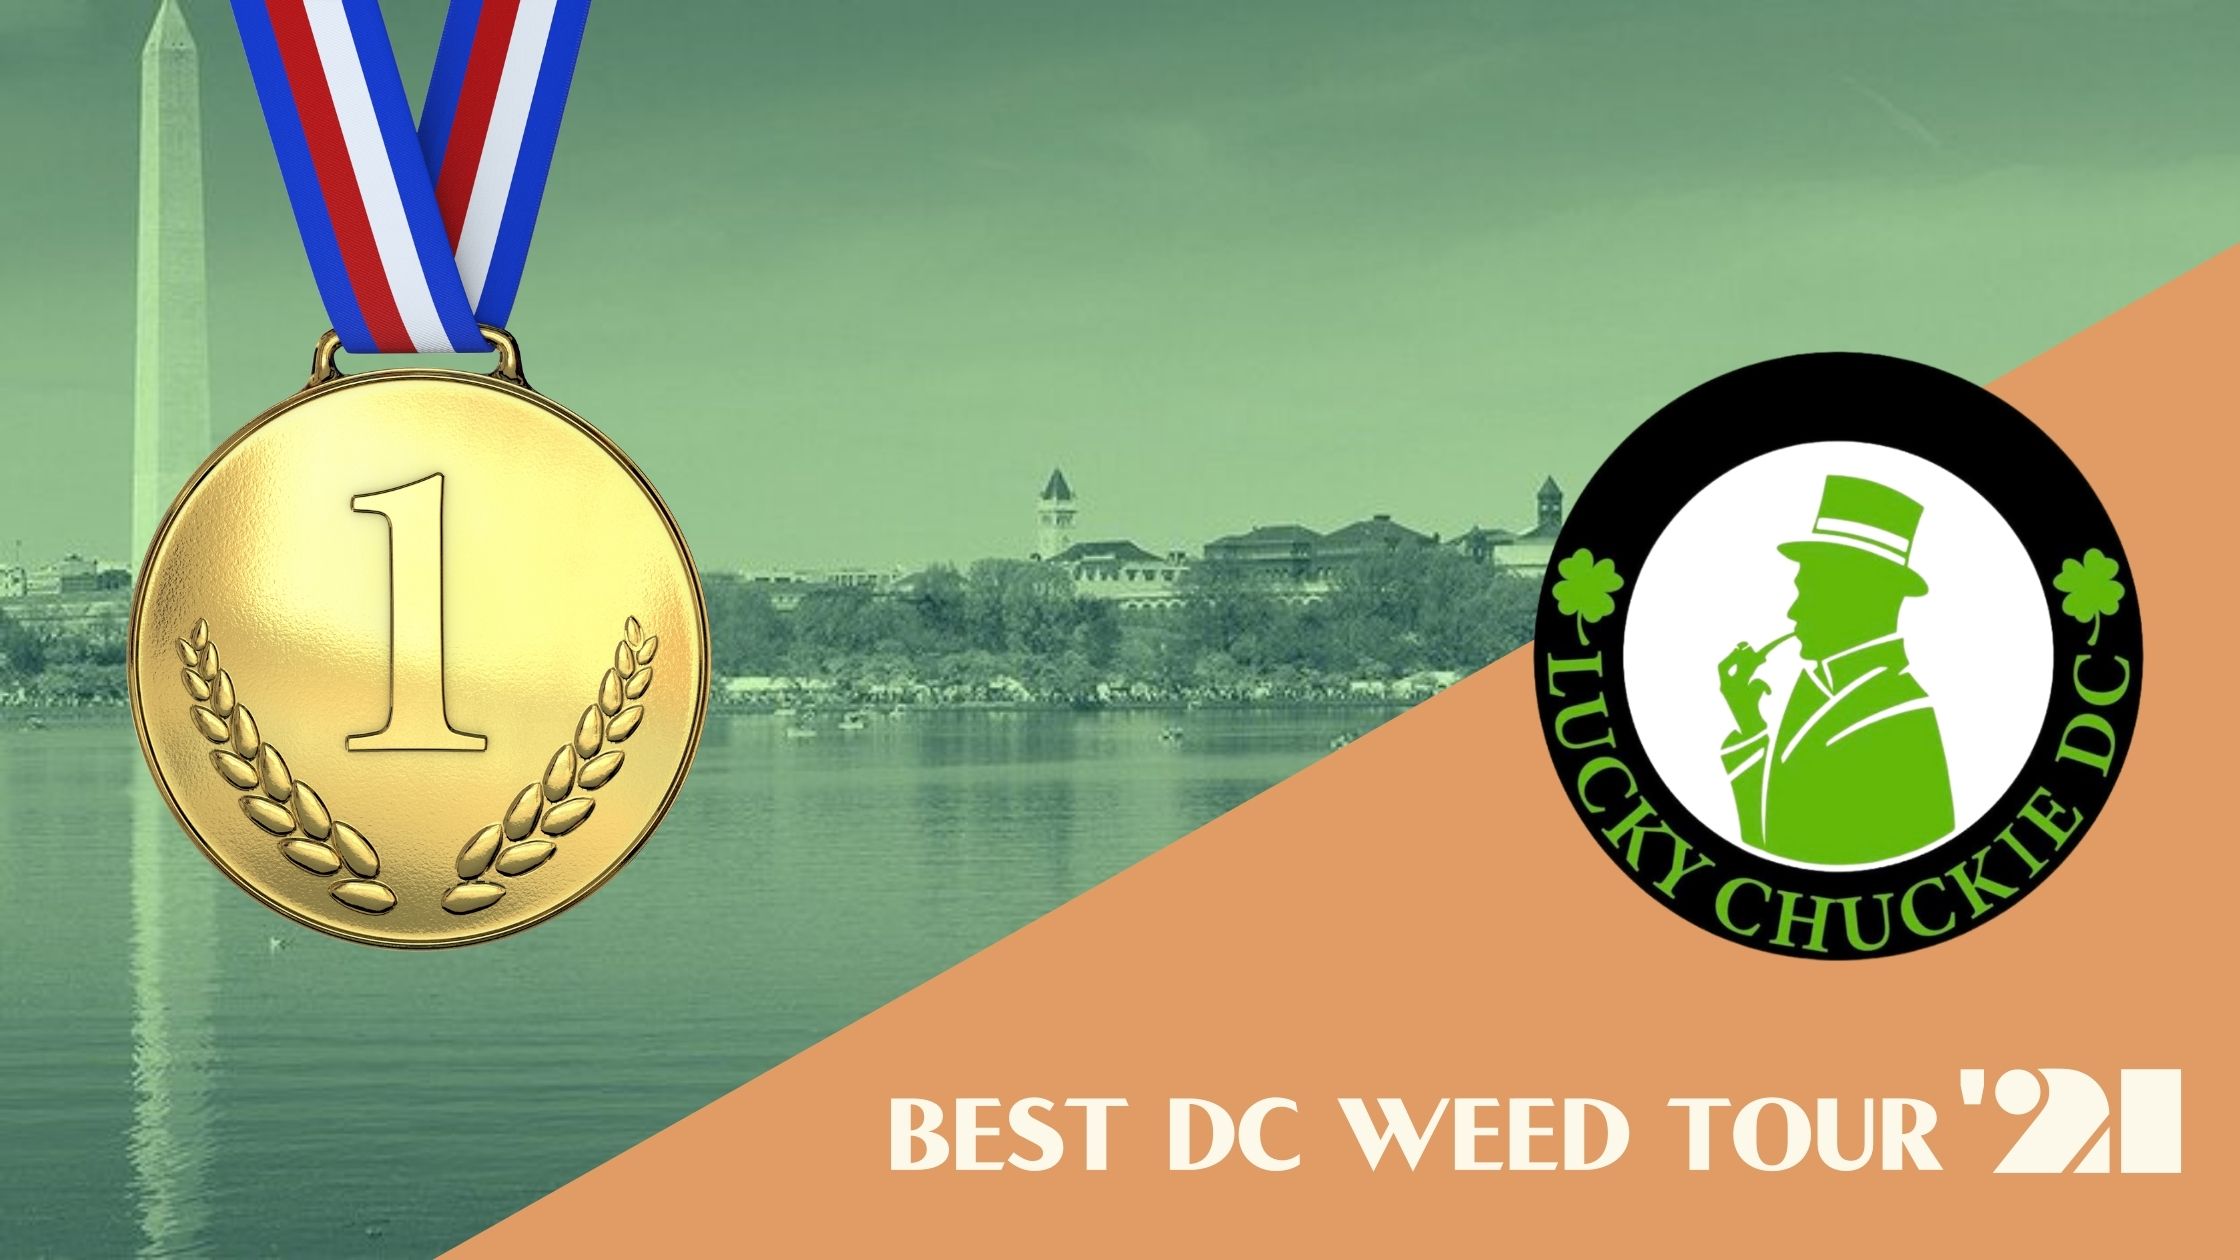 best dc weed tour 2021 lucky chuckie dc